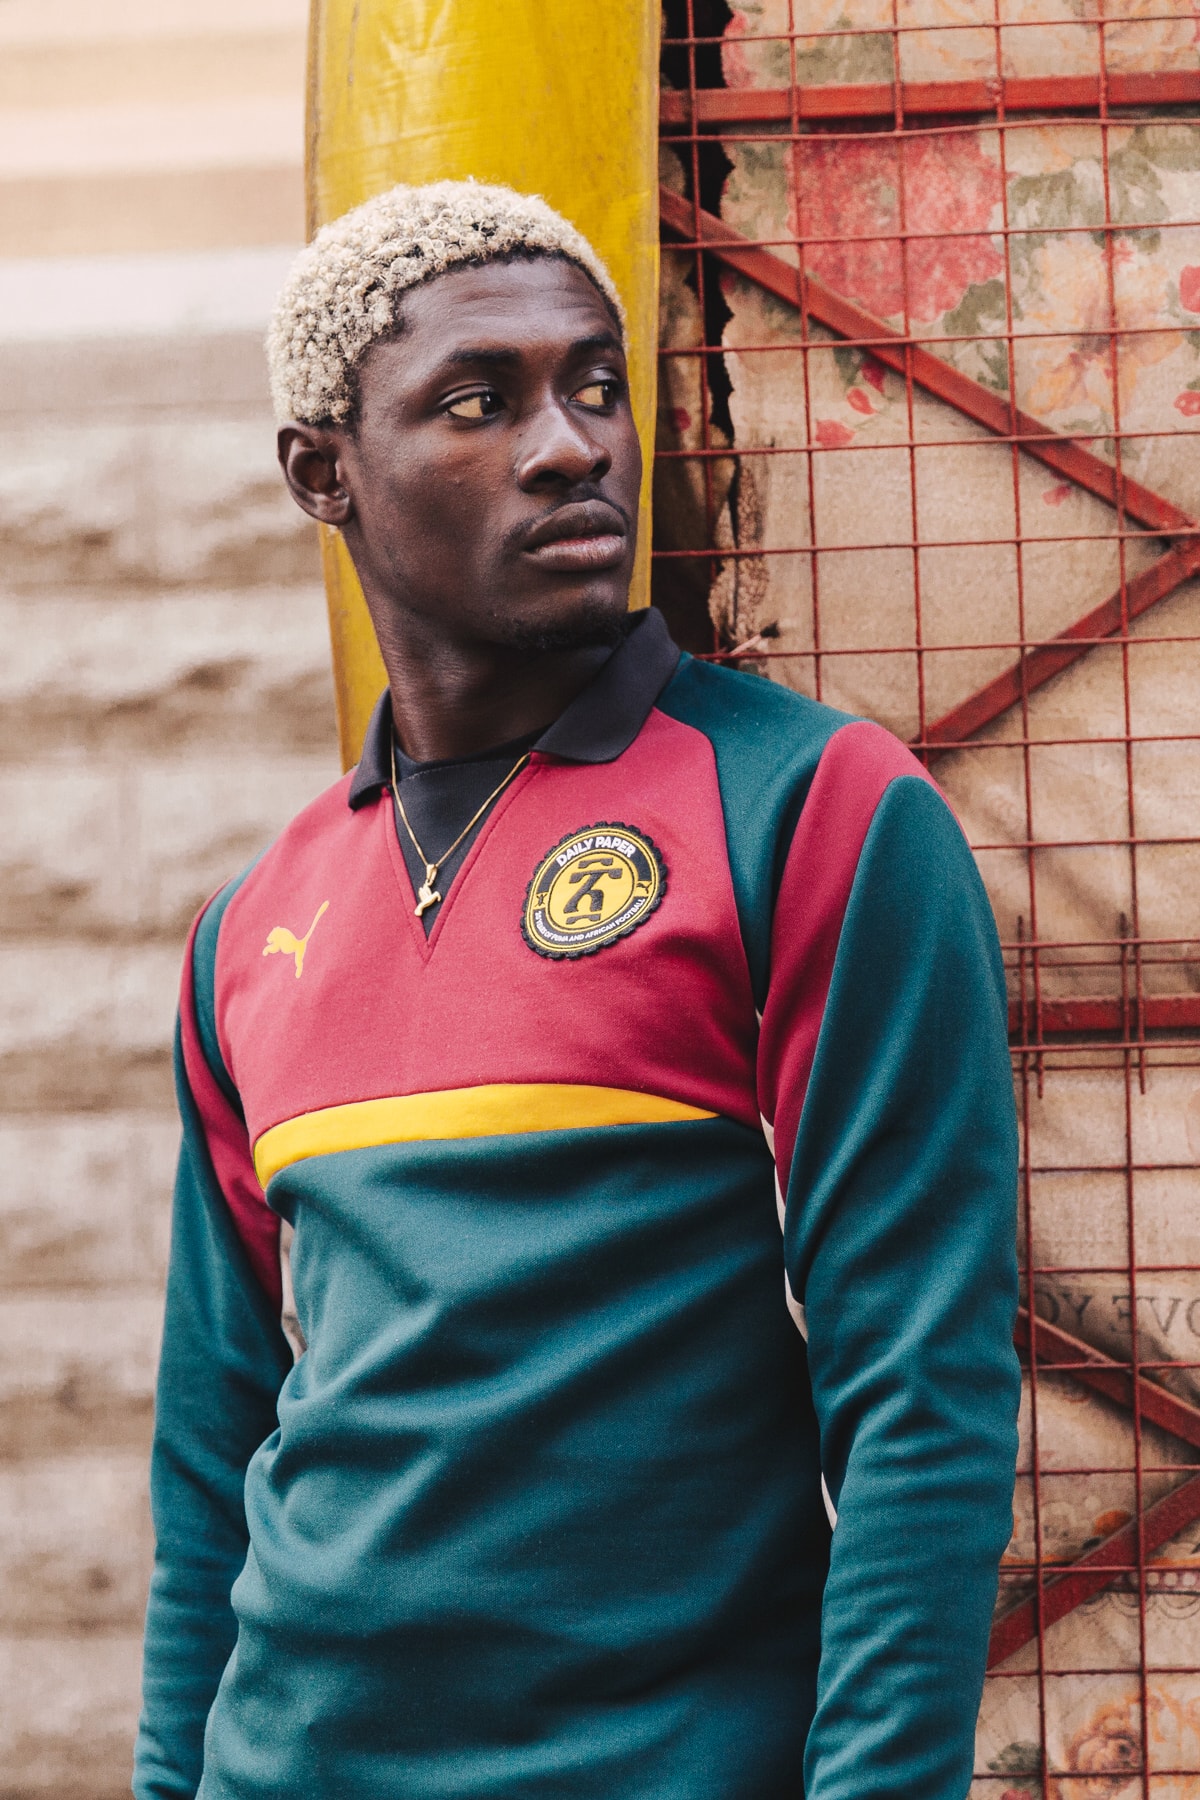 PUMA Daily Paper Fall/Winter 2017 Collection African Football Release Info Date September 16